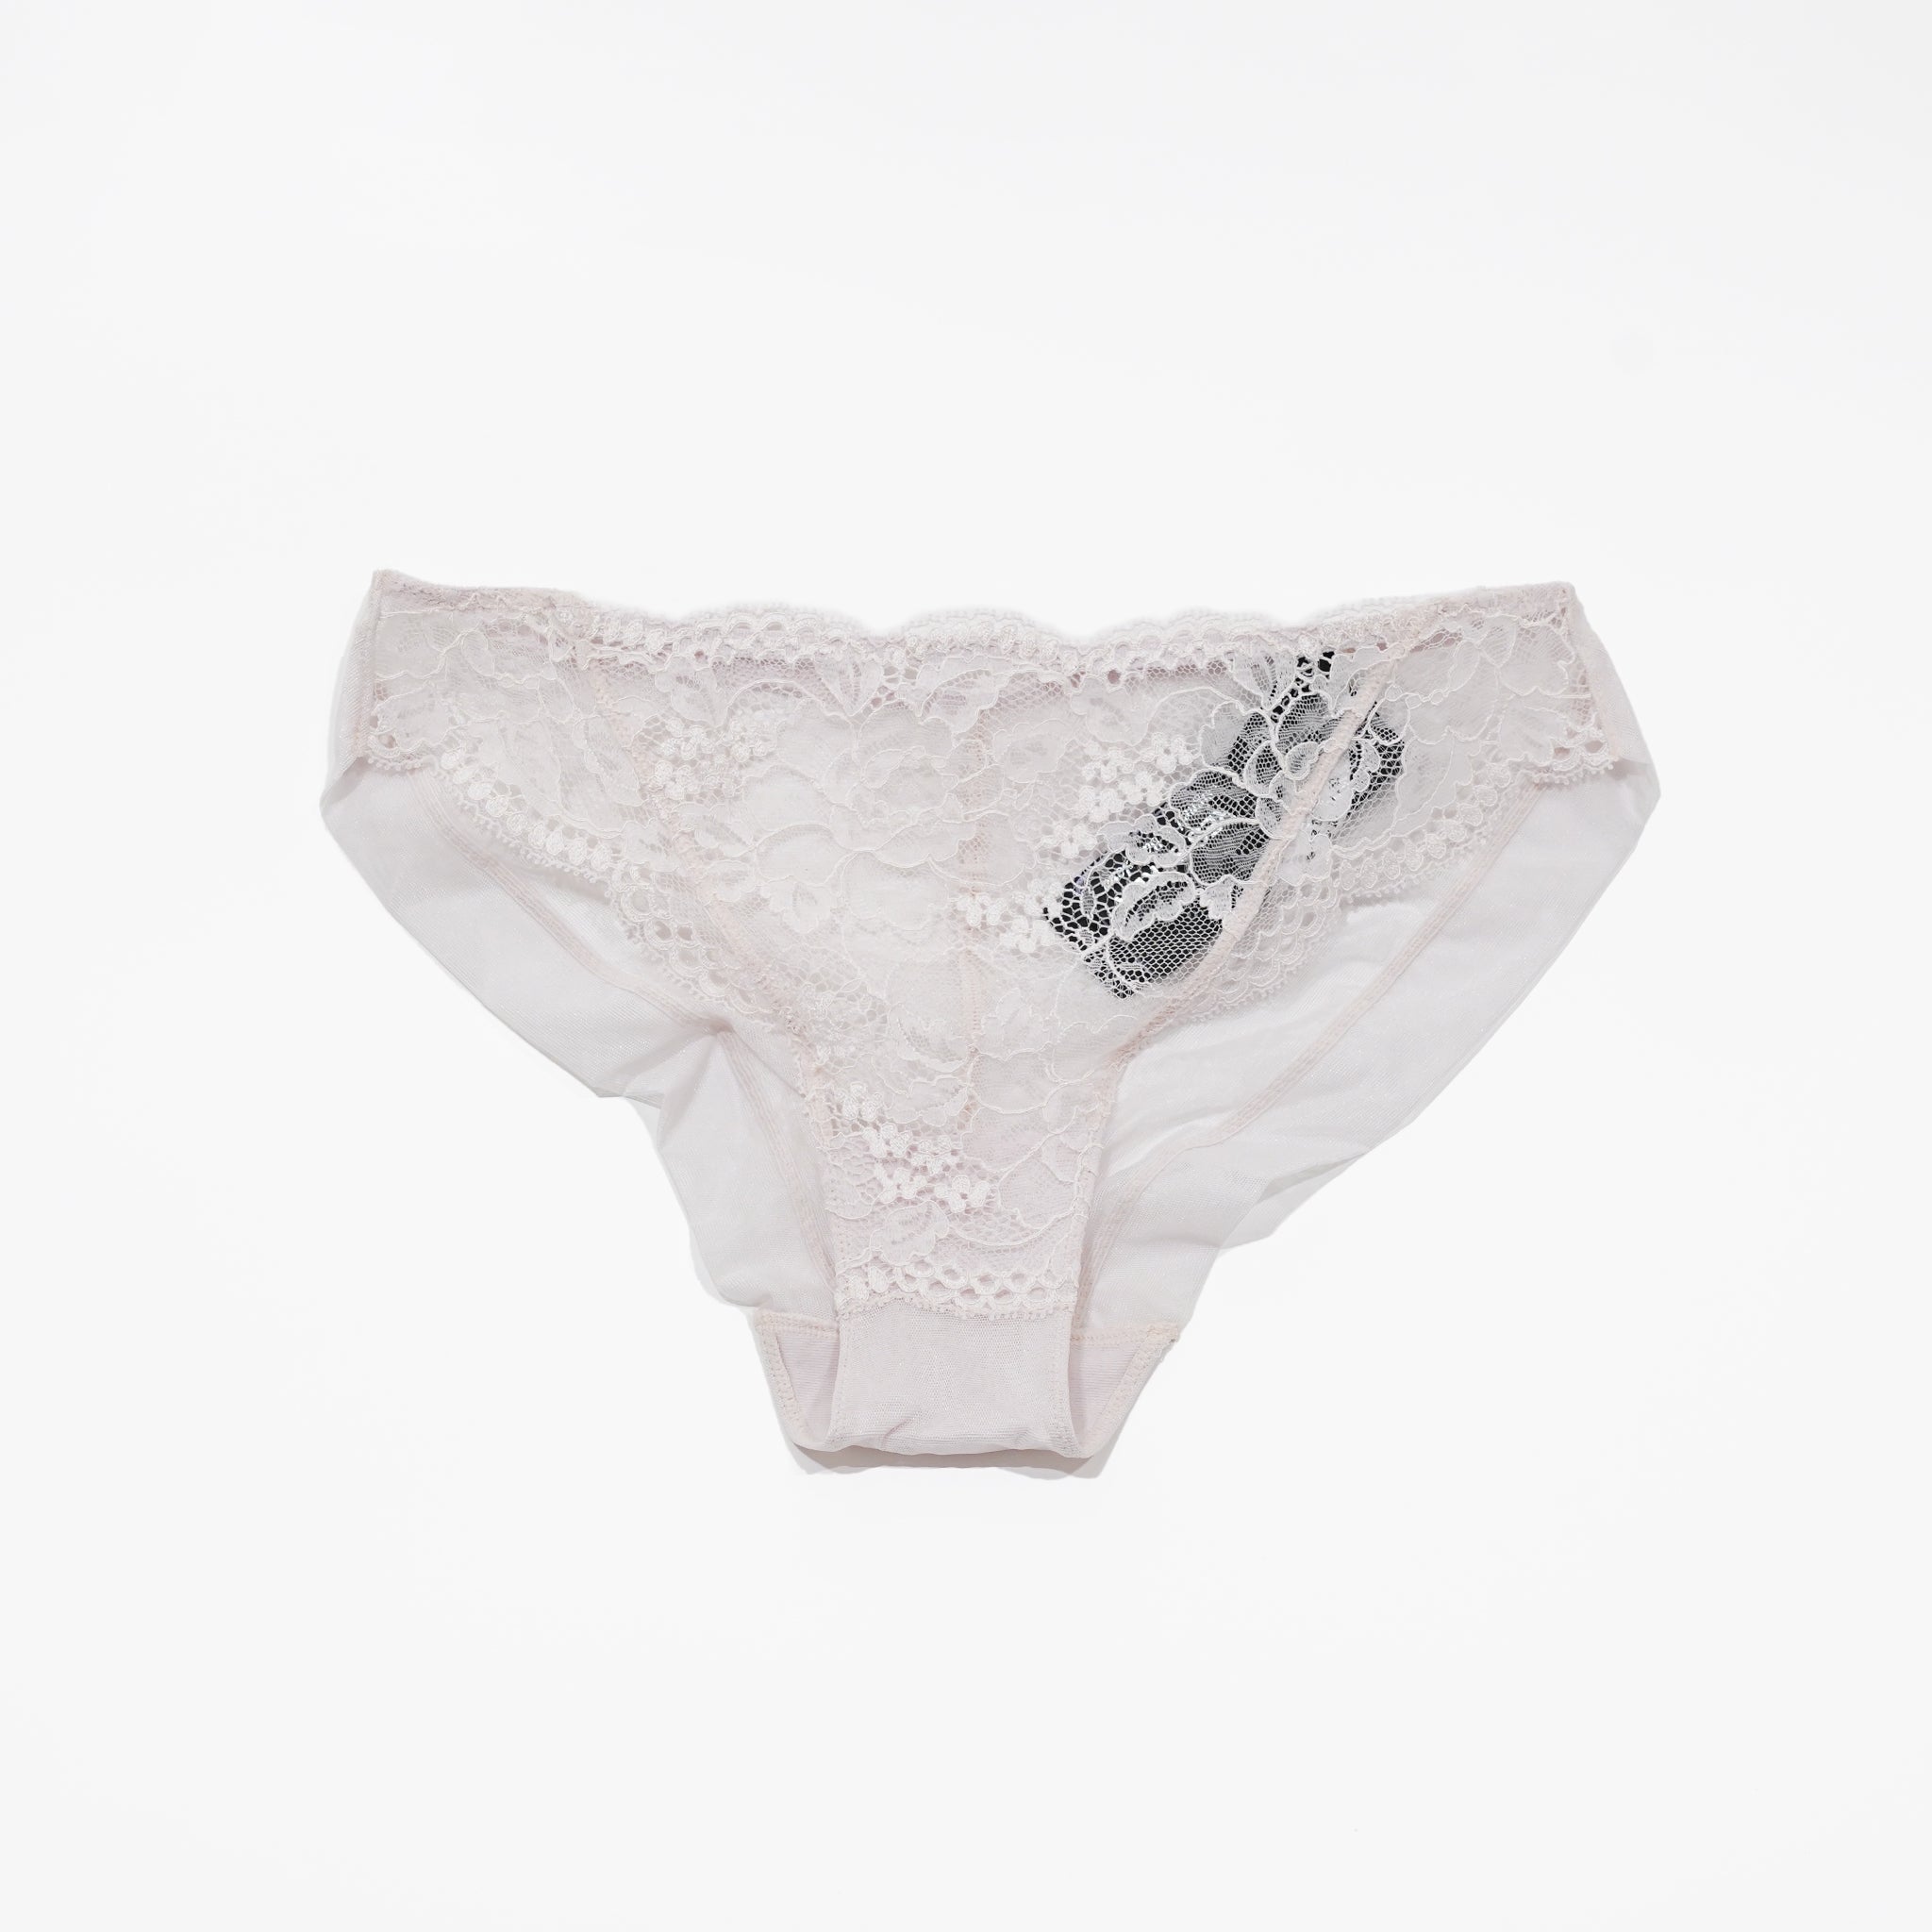 Thong in Off White with Cotton Leavers Lace